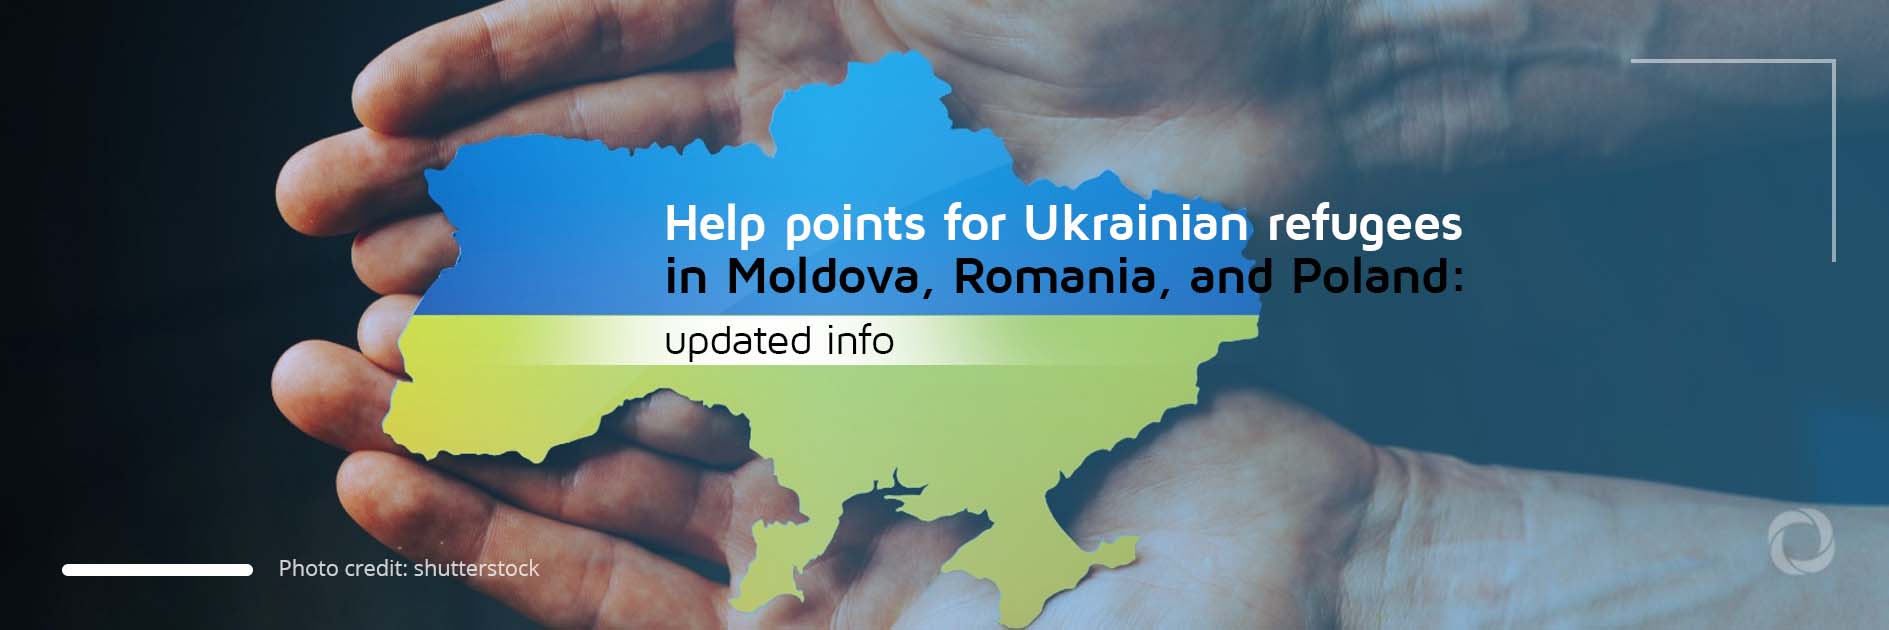 Help points for Ukrainian refugees in Moldova, Romania, and Poland: updated info